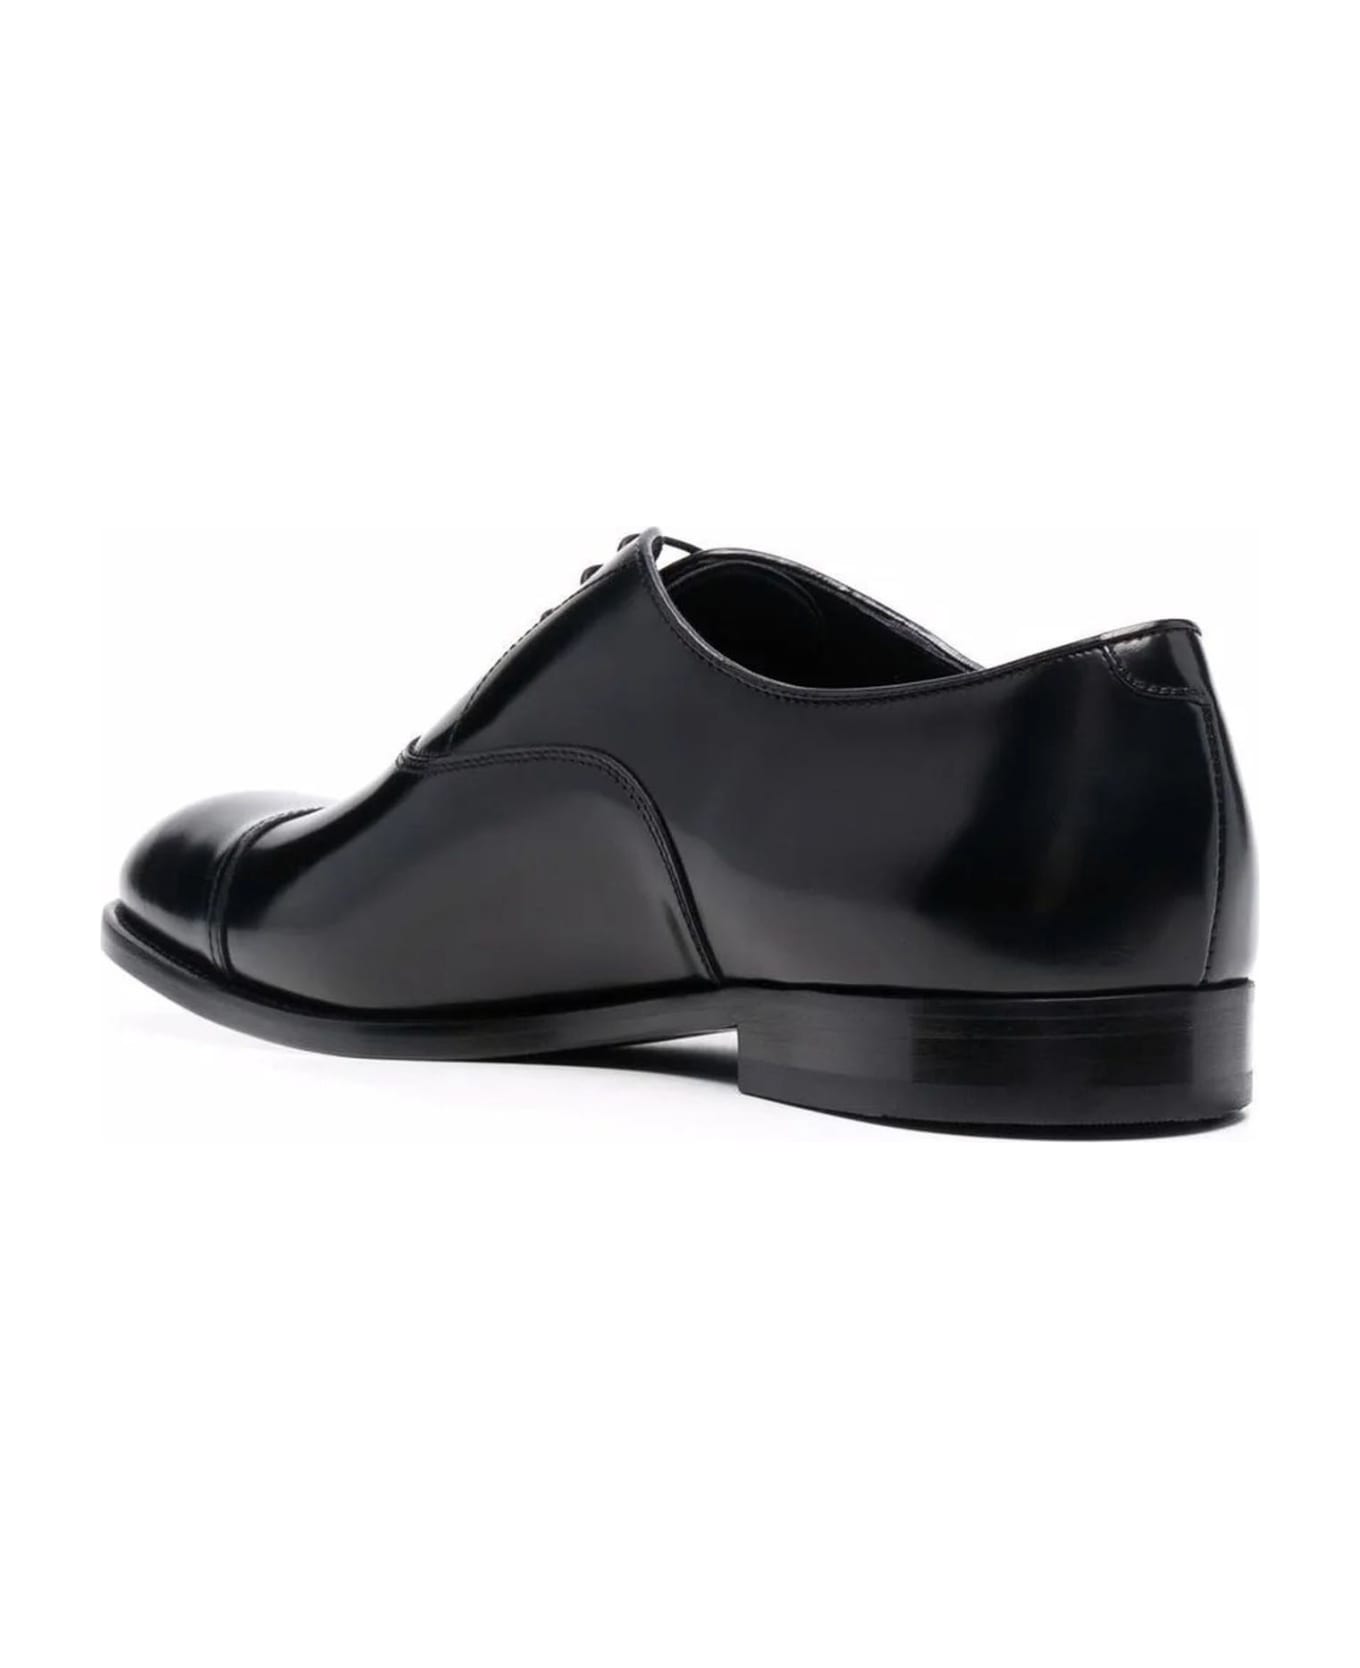 Doucal's Black Leather Lace Up Oxford Shoes - Black